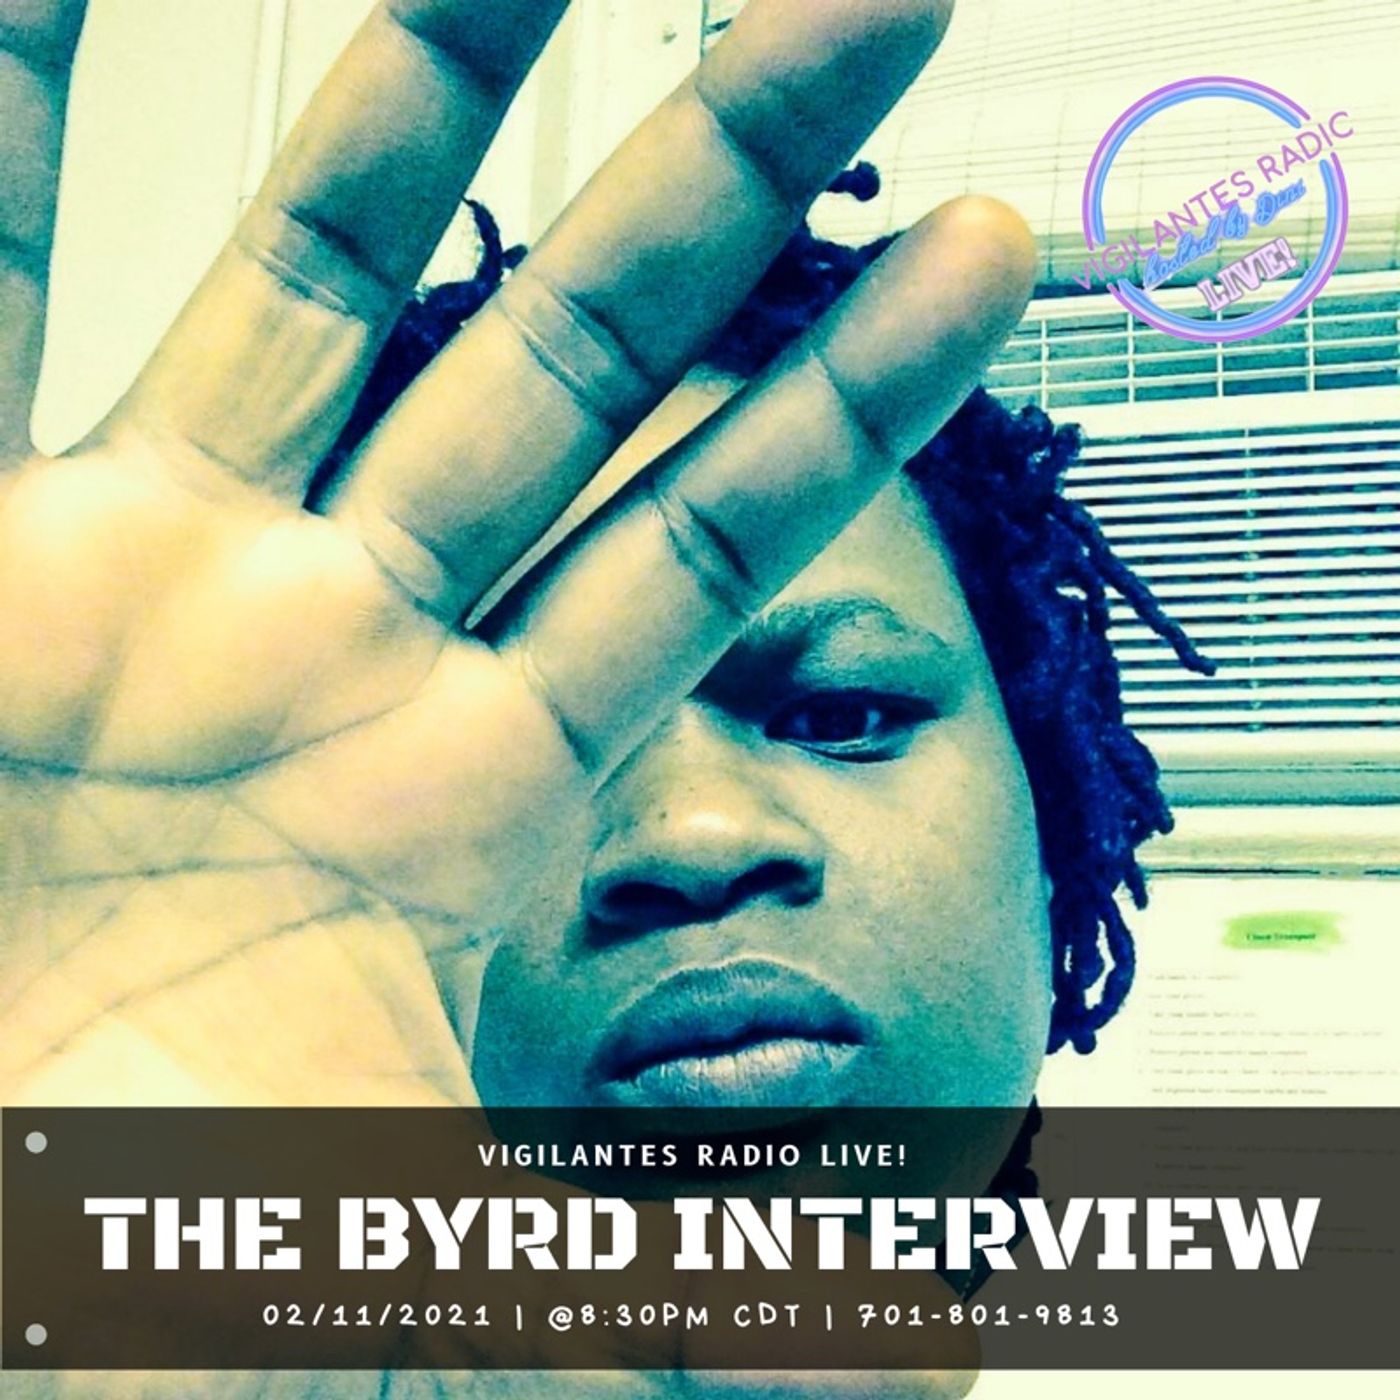 The Byrd Interview. Image